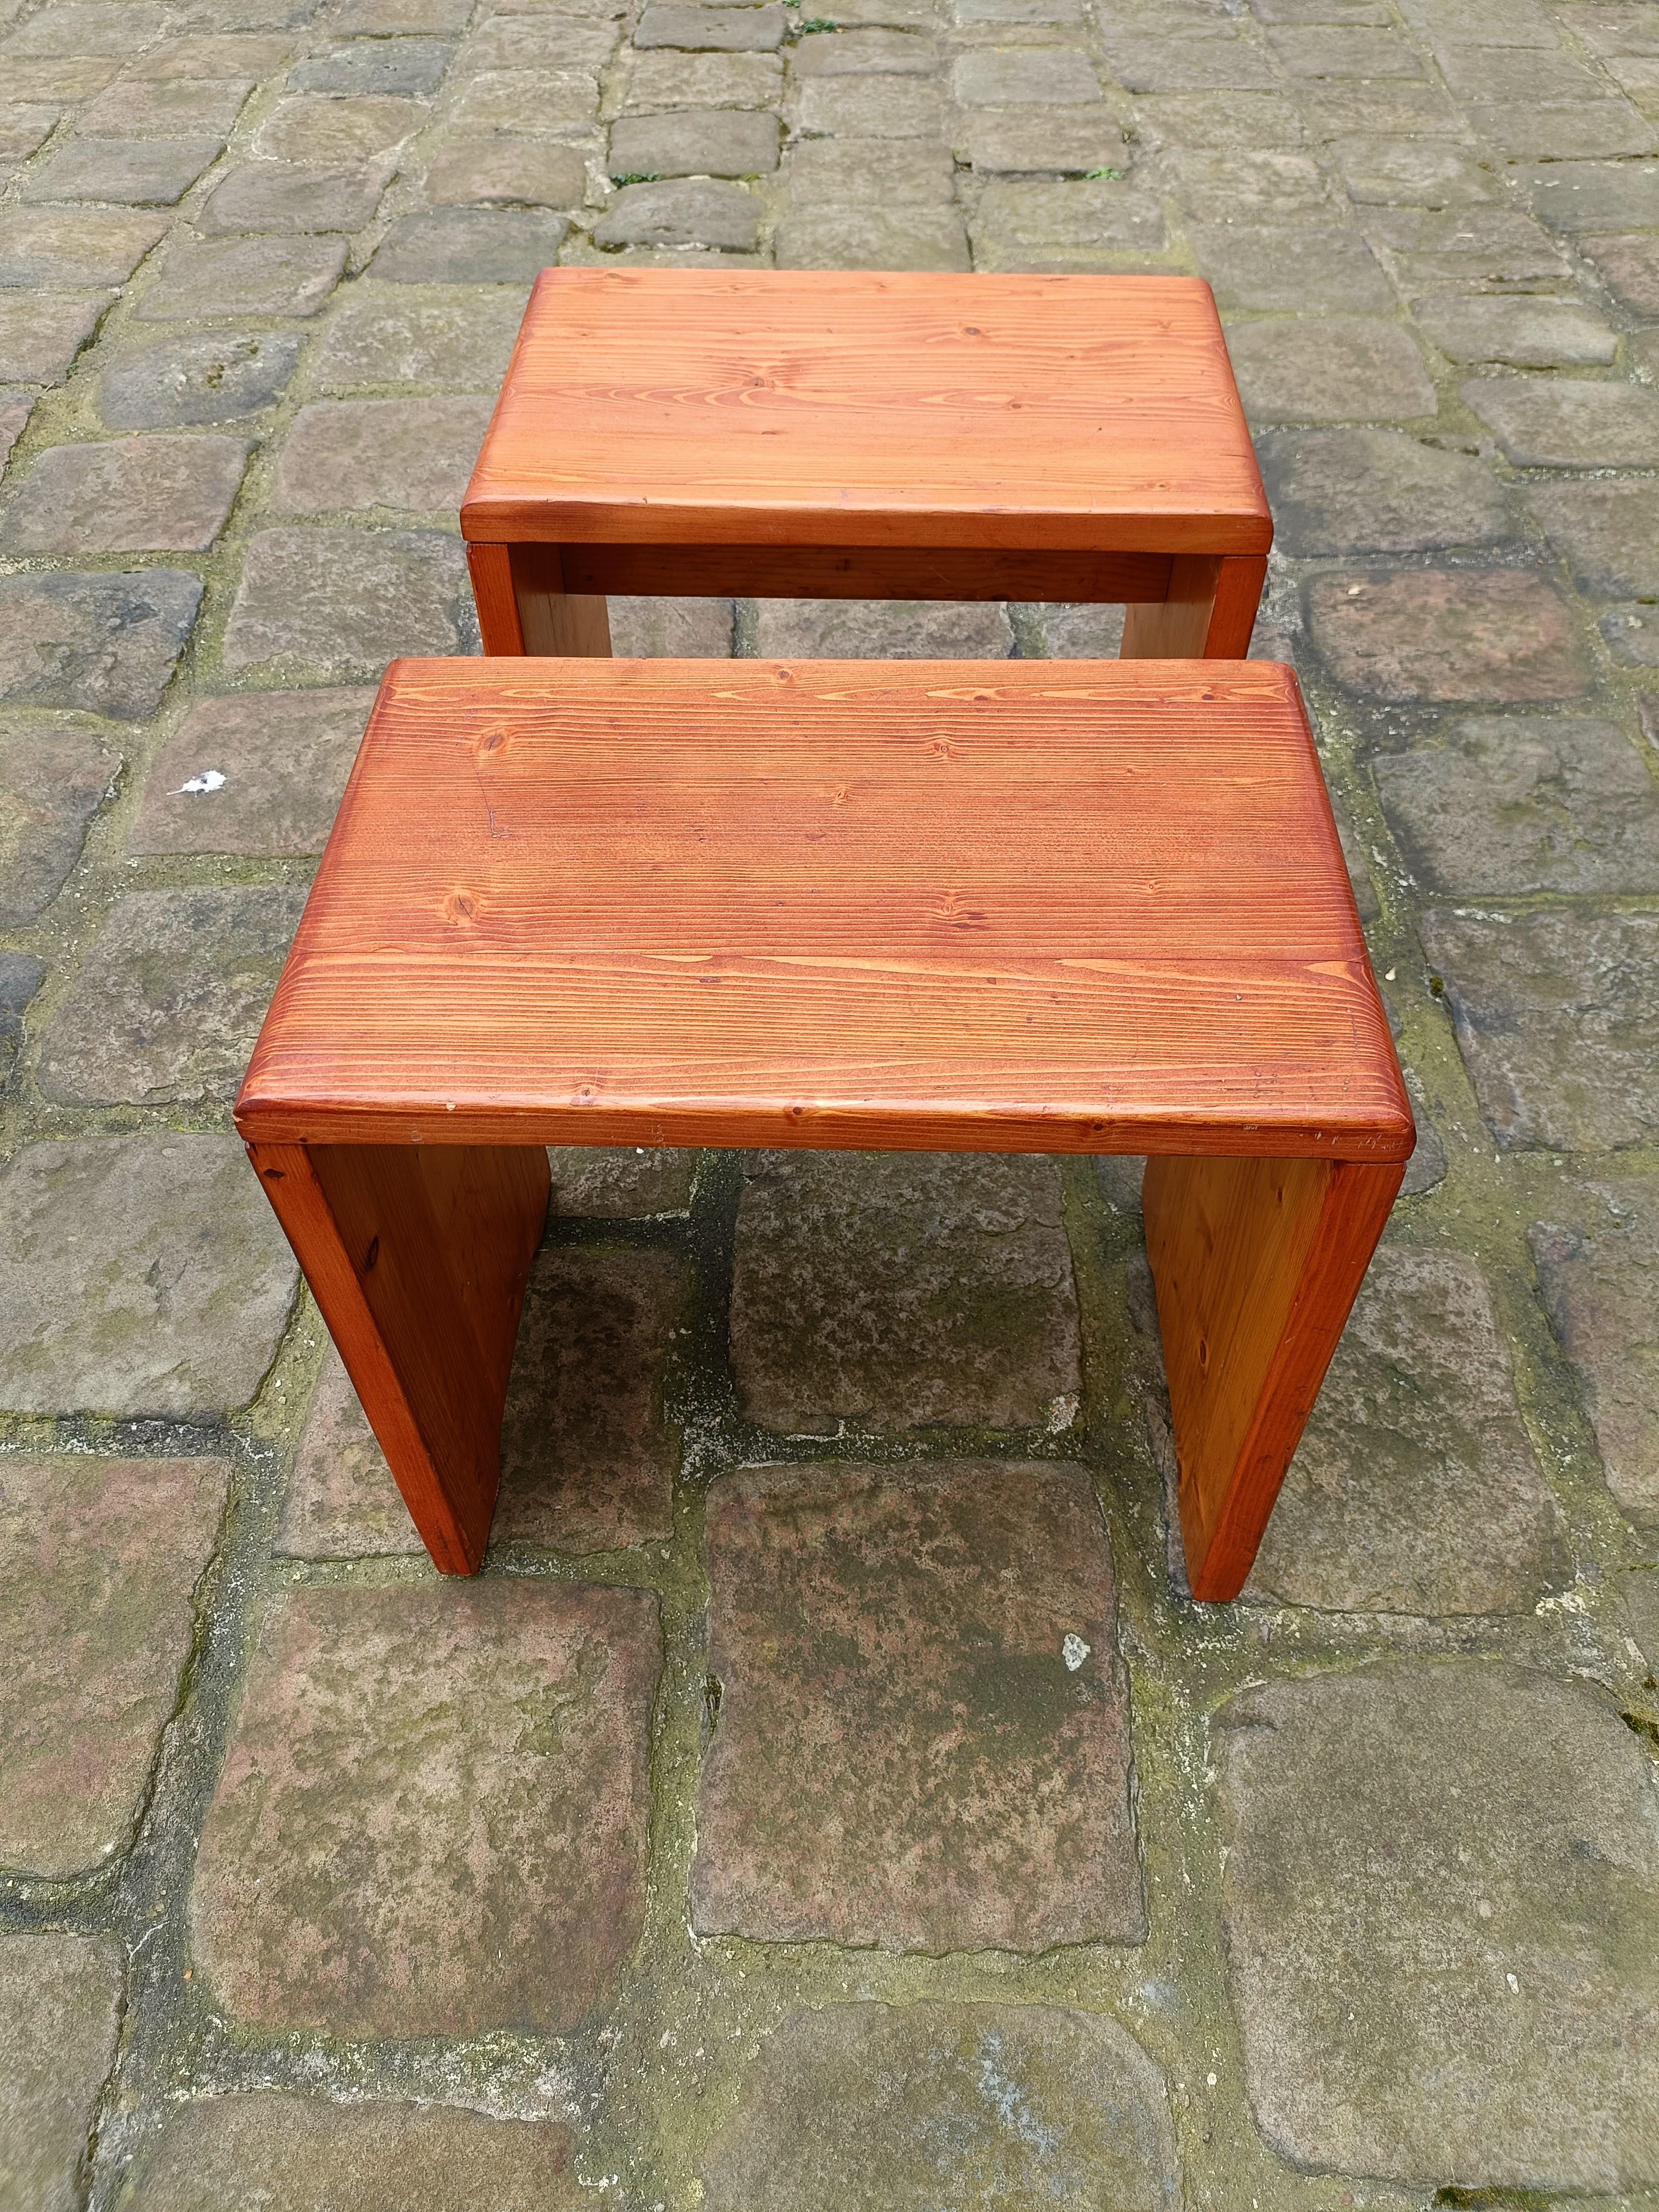 Perriand Pine Wood Stool Charlotte Perriand Pierre Et Vacances Les Arcs, 1800 For Sale 10